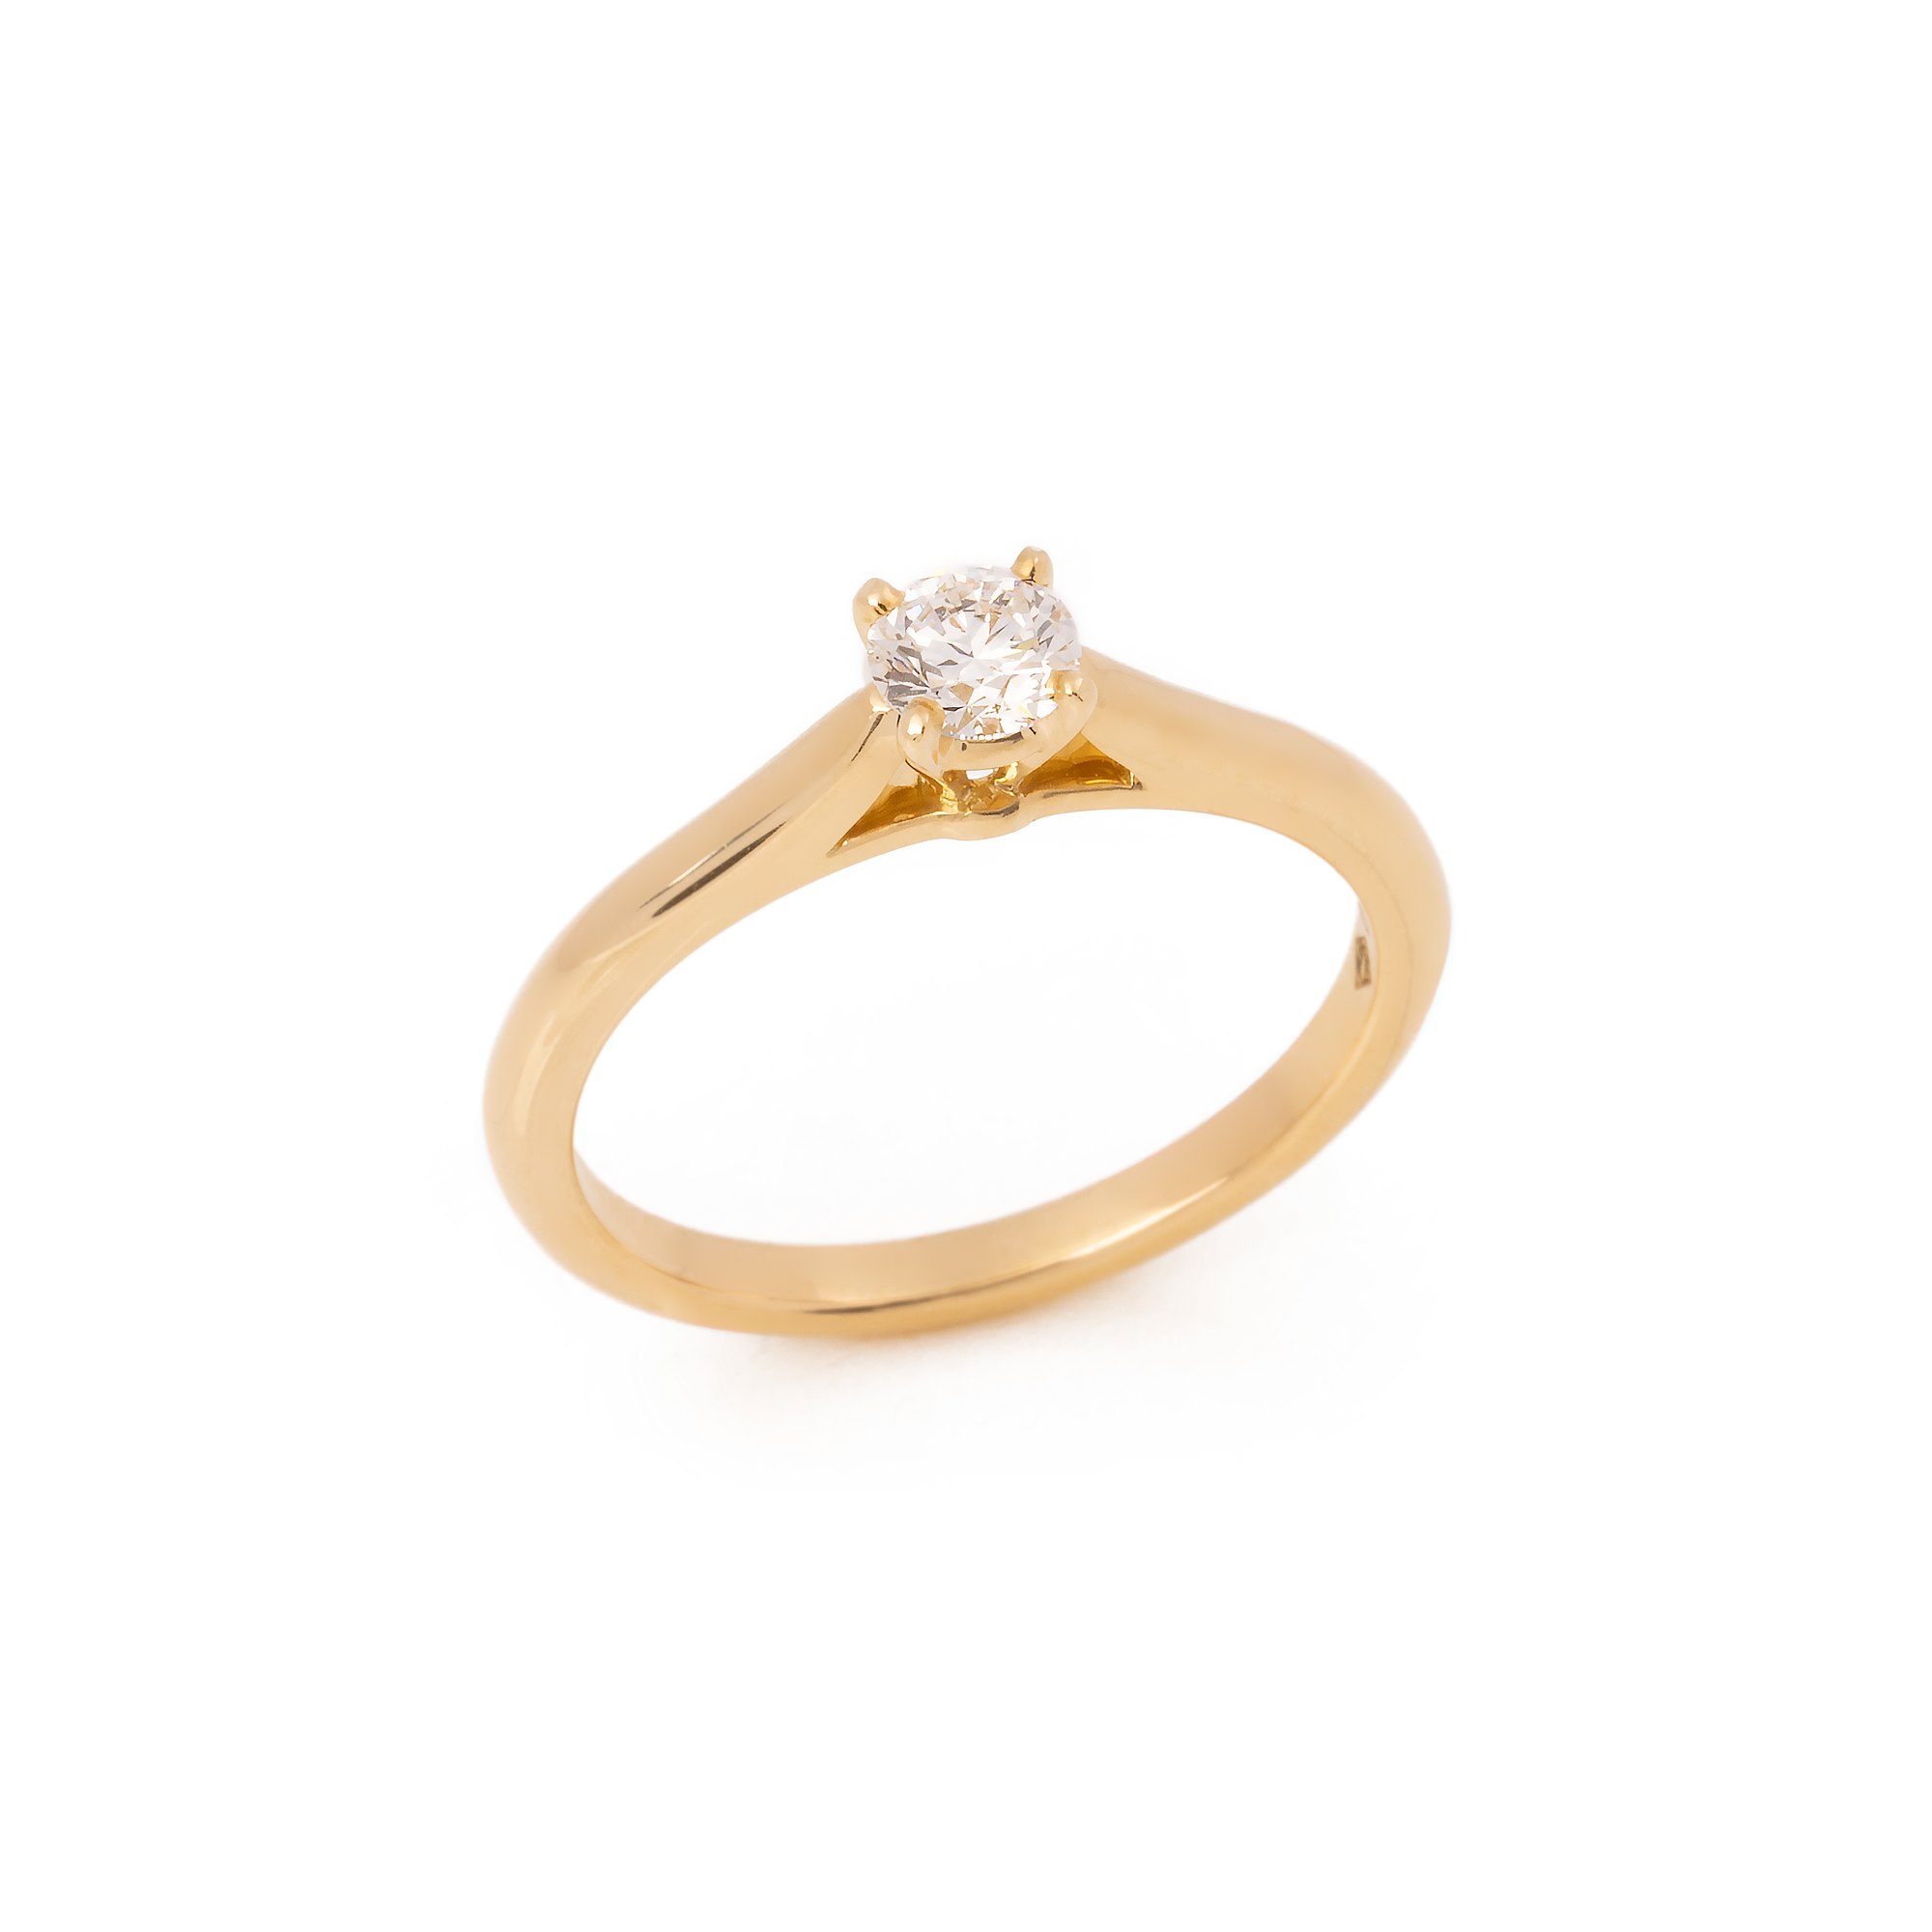 Cartier 1895 0.23ct Solitaire Ring